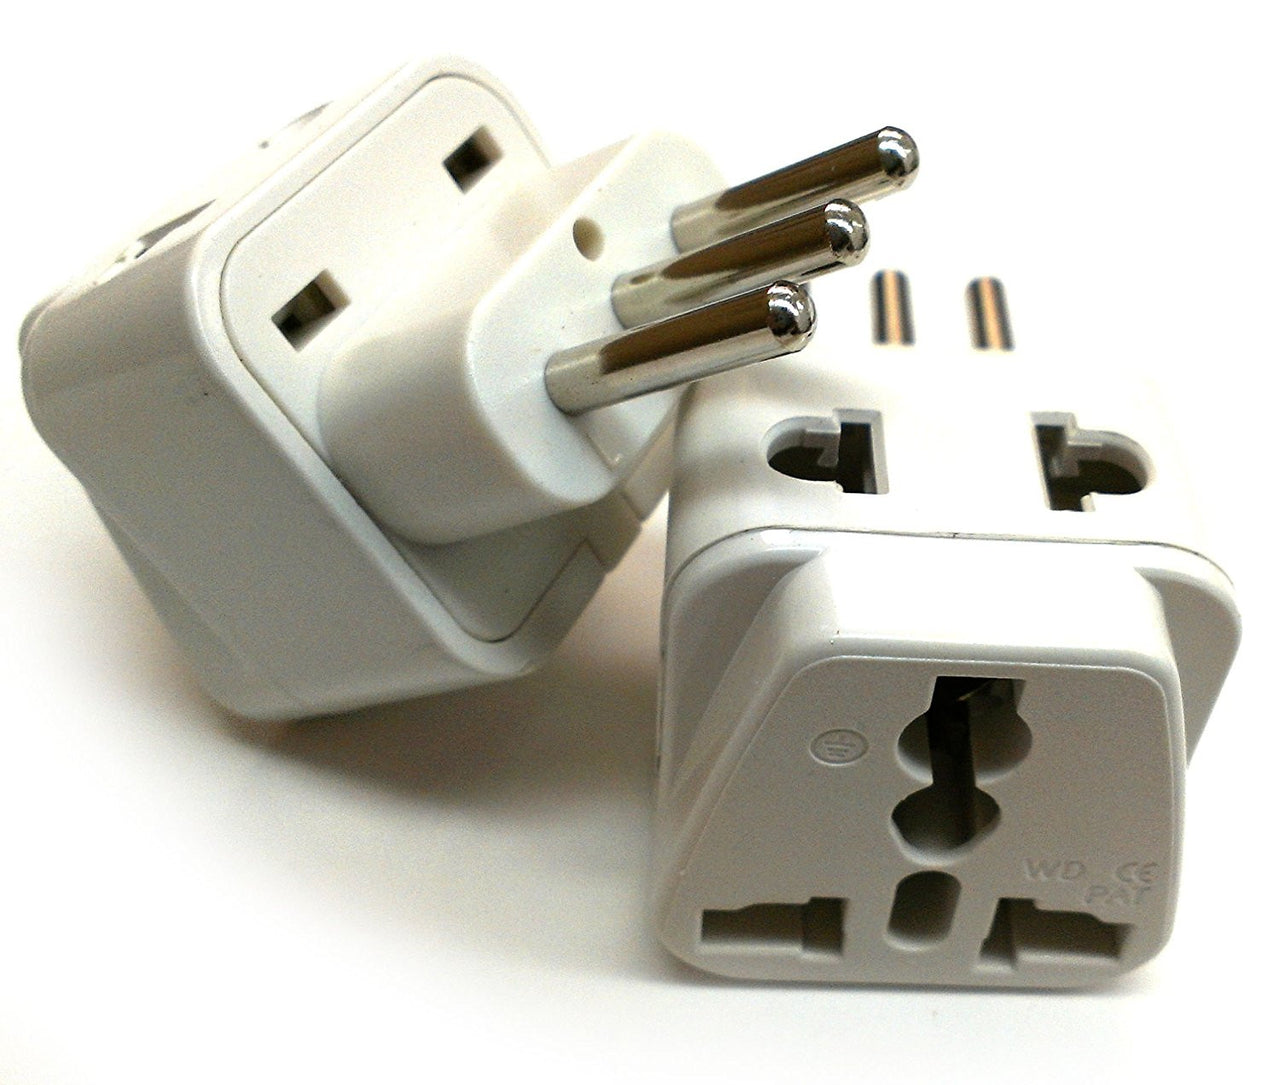 Italy, Chile, Uruguay - Type L 2 in 1 - Travel Plug Adapter - Popularelectronics.com